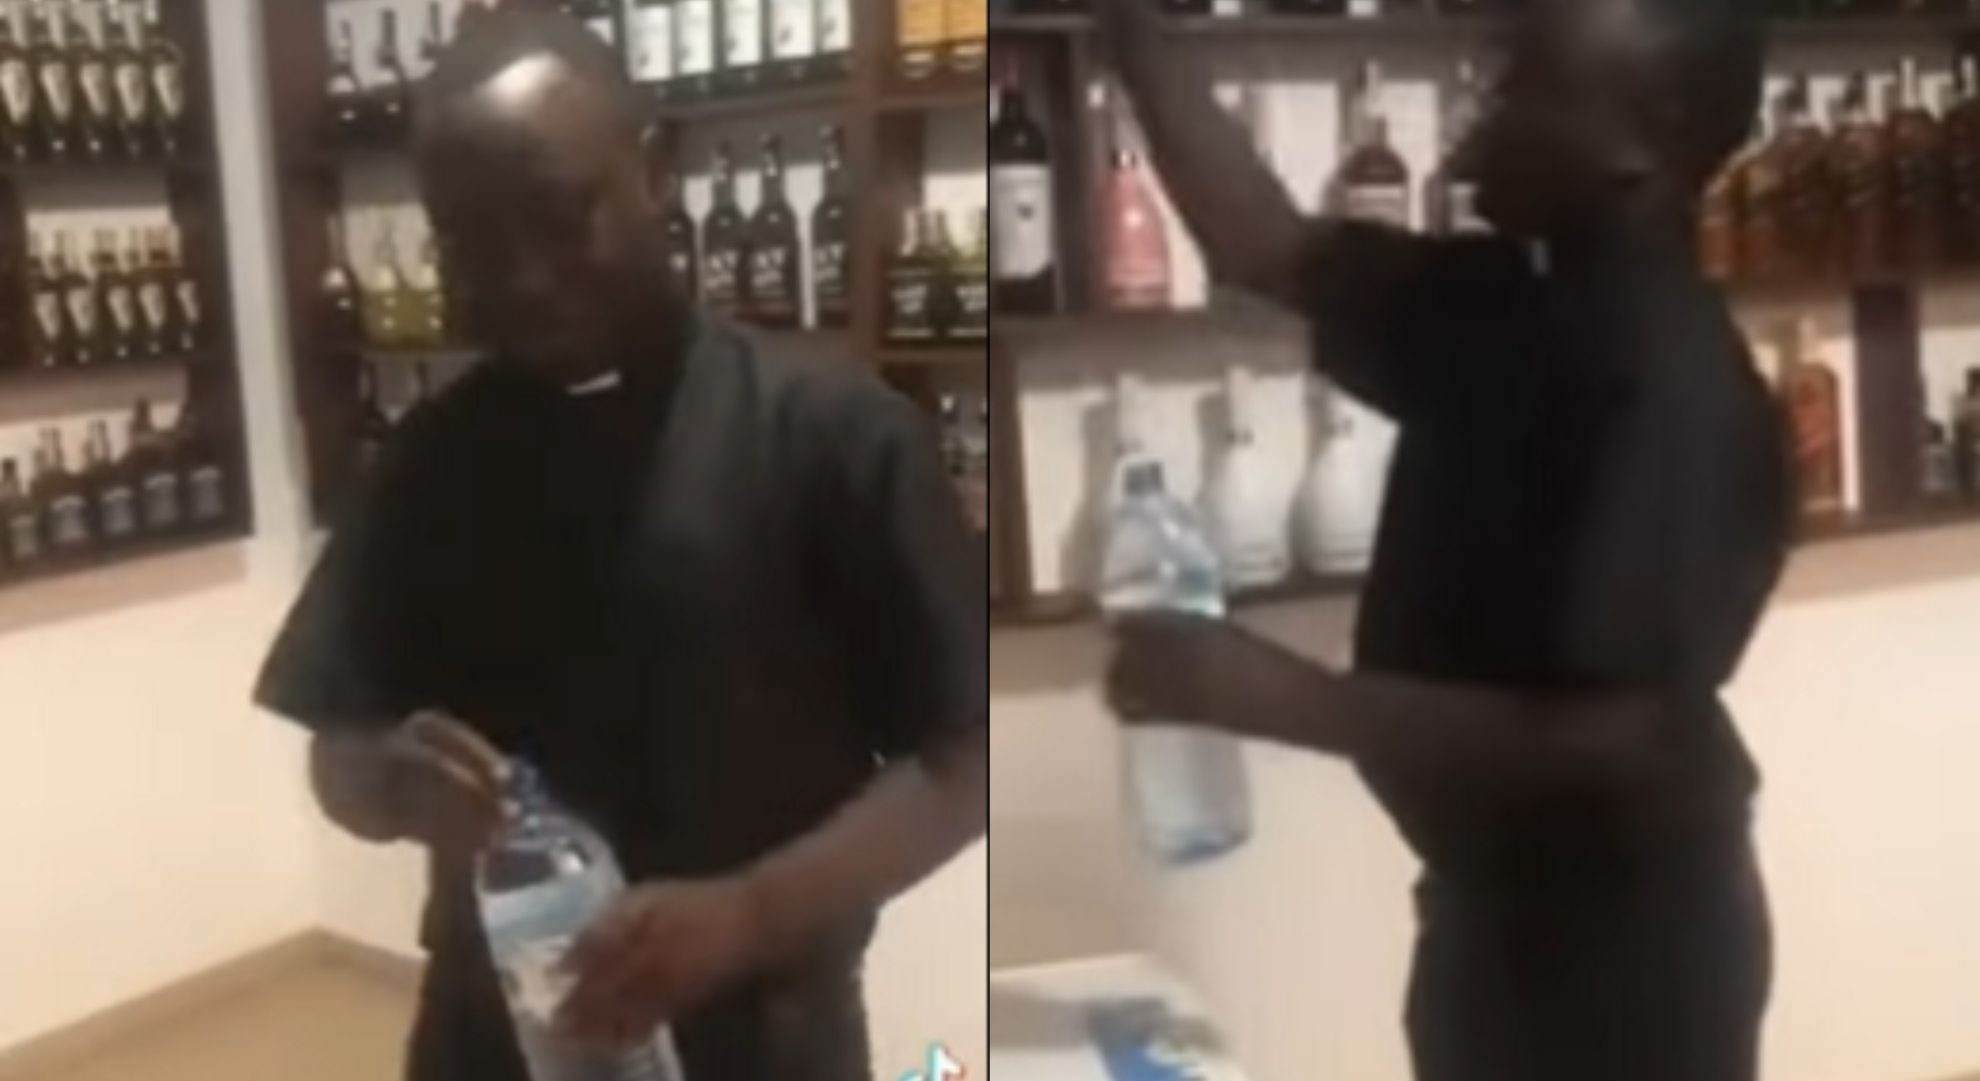 Celebrities React As Reverend Father Sprinkles Holy Water On Liquor